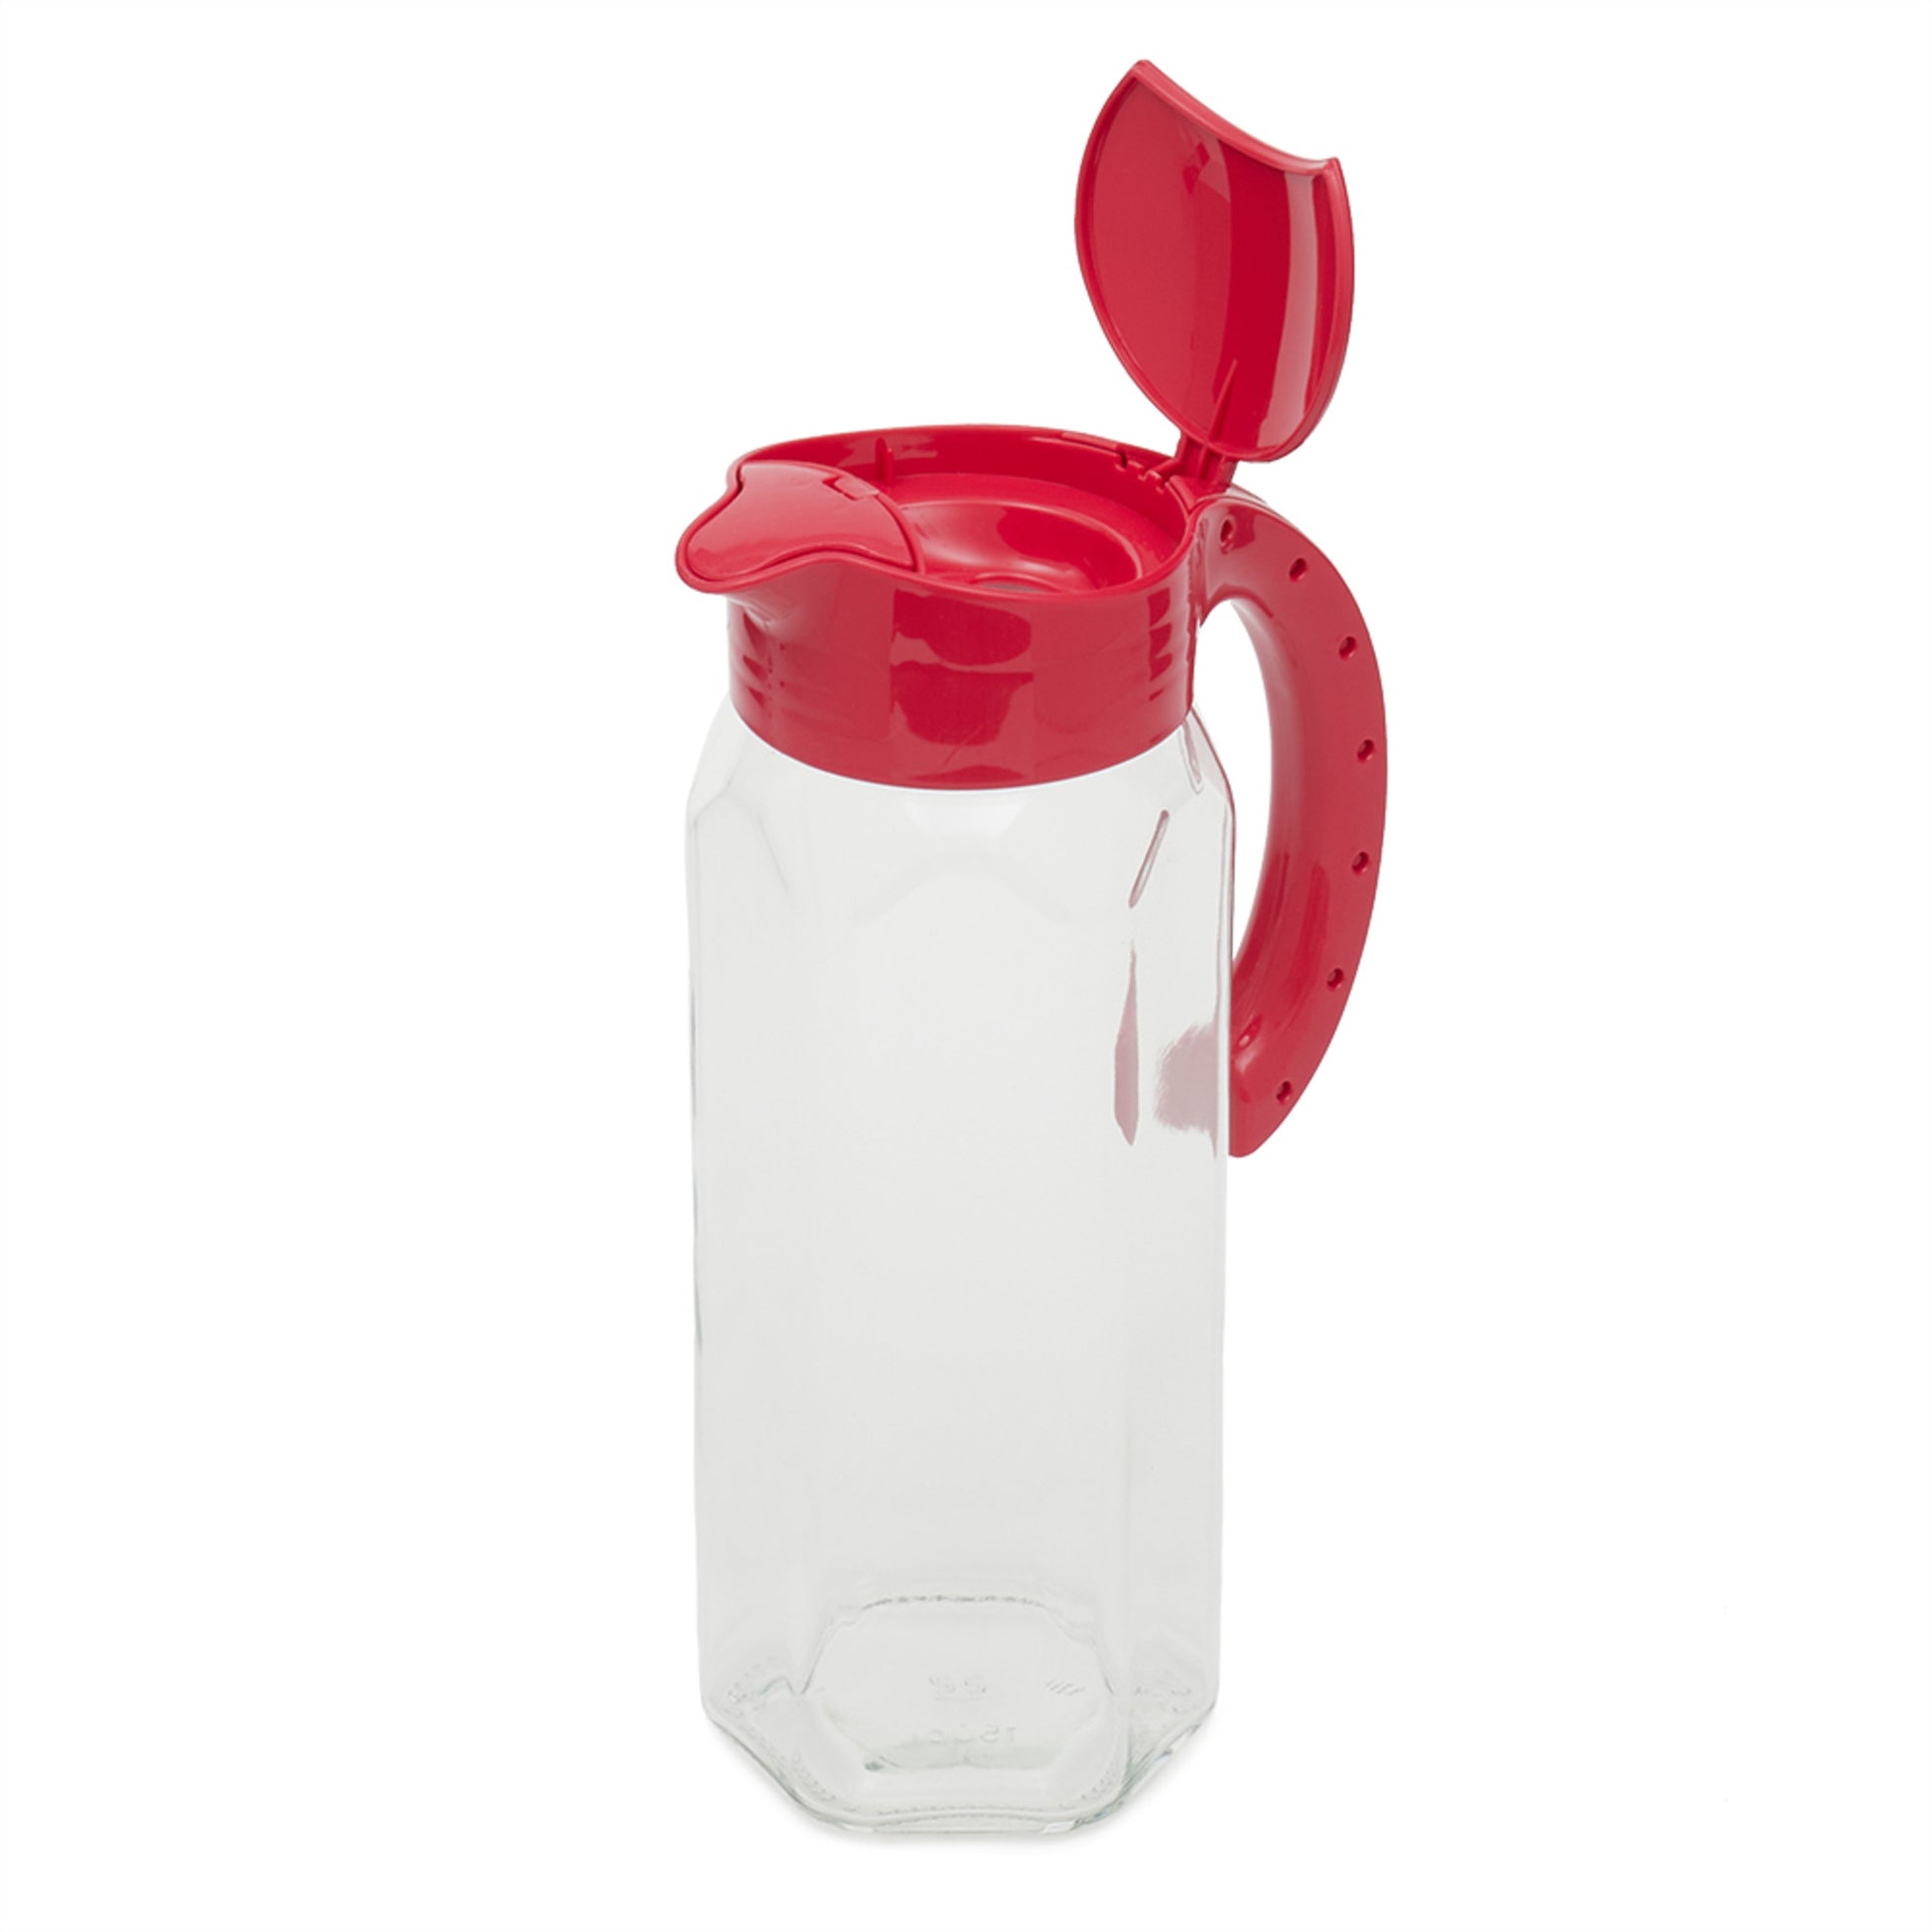 Glass Pitcher with Fitted Lid